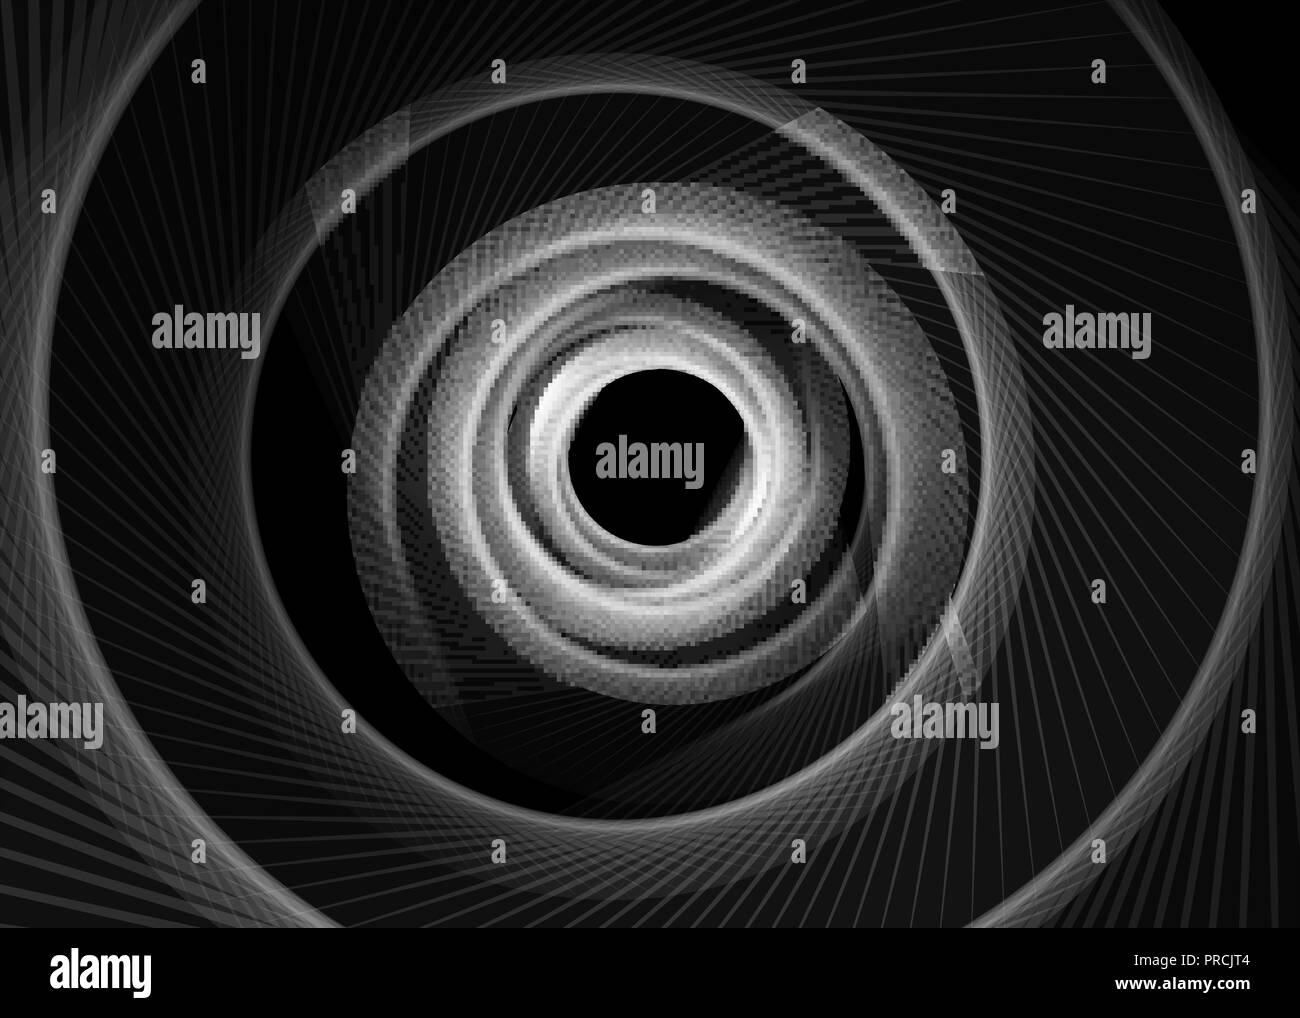 Vector striped spiral abstract tunnel dark background. Spiral funnel. Gray twisted ray black hole. Exciting gently spiraling optical illusion Stock Vector